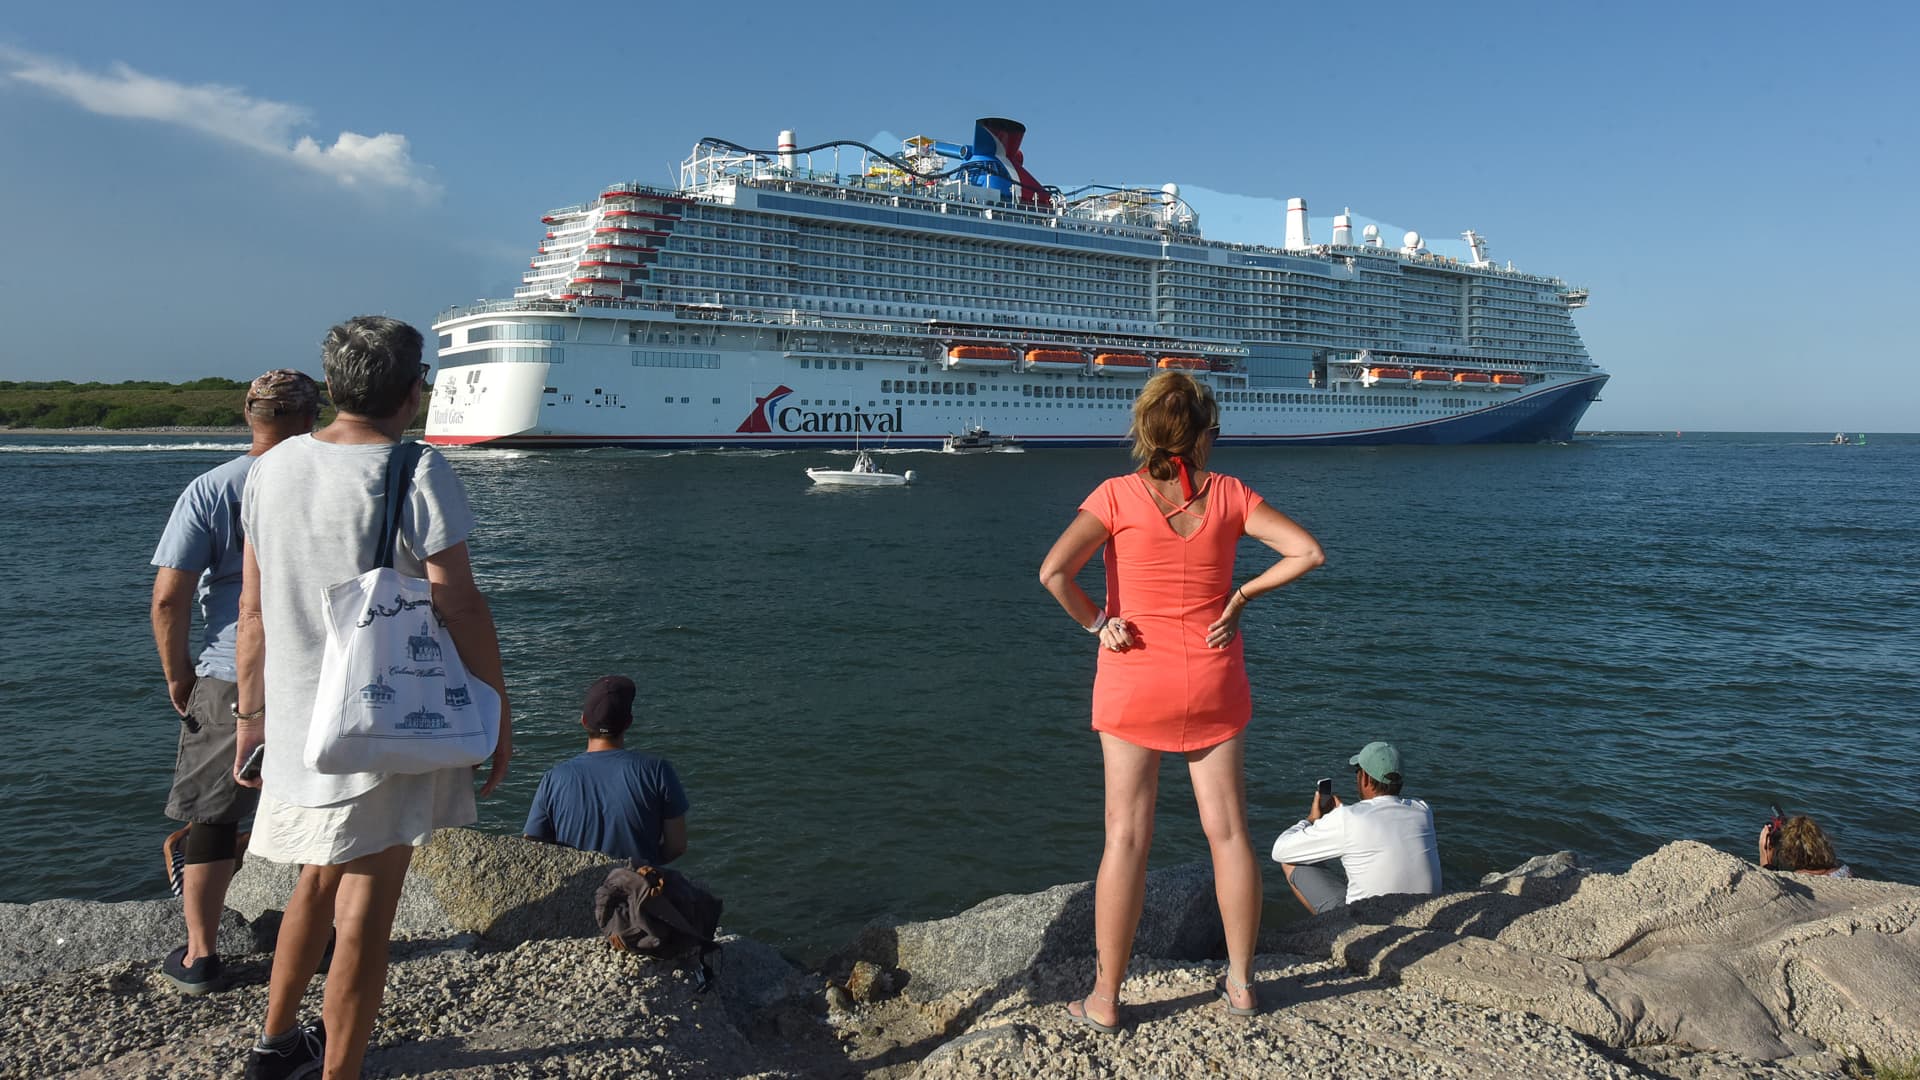 Debt-loaded cruise lines’ shares fall as Fed hikes rate and recession fears grow